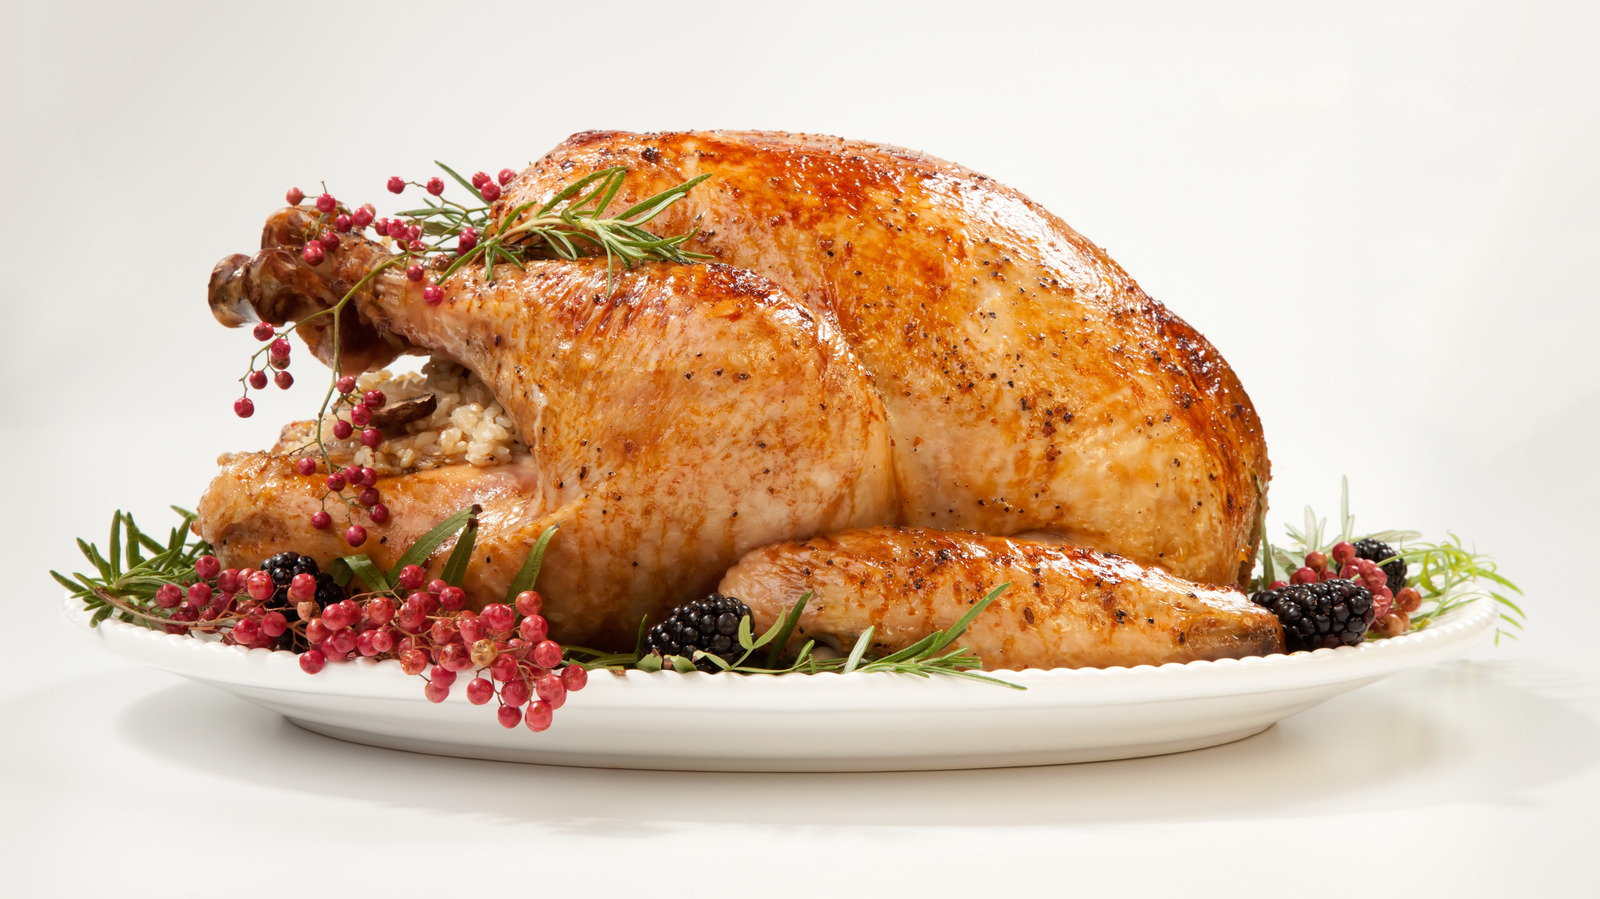 The Turkey-Roasting Hack Everyone Should Know Before Thanksgiving